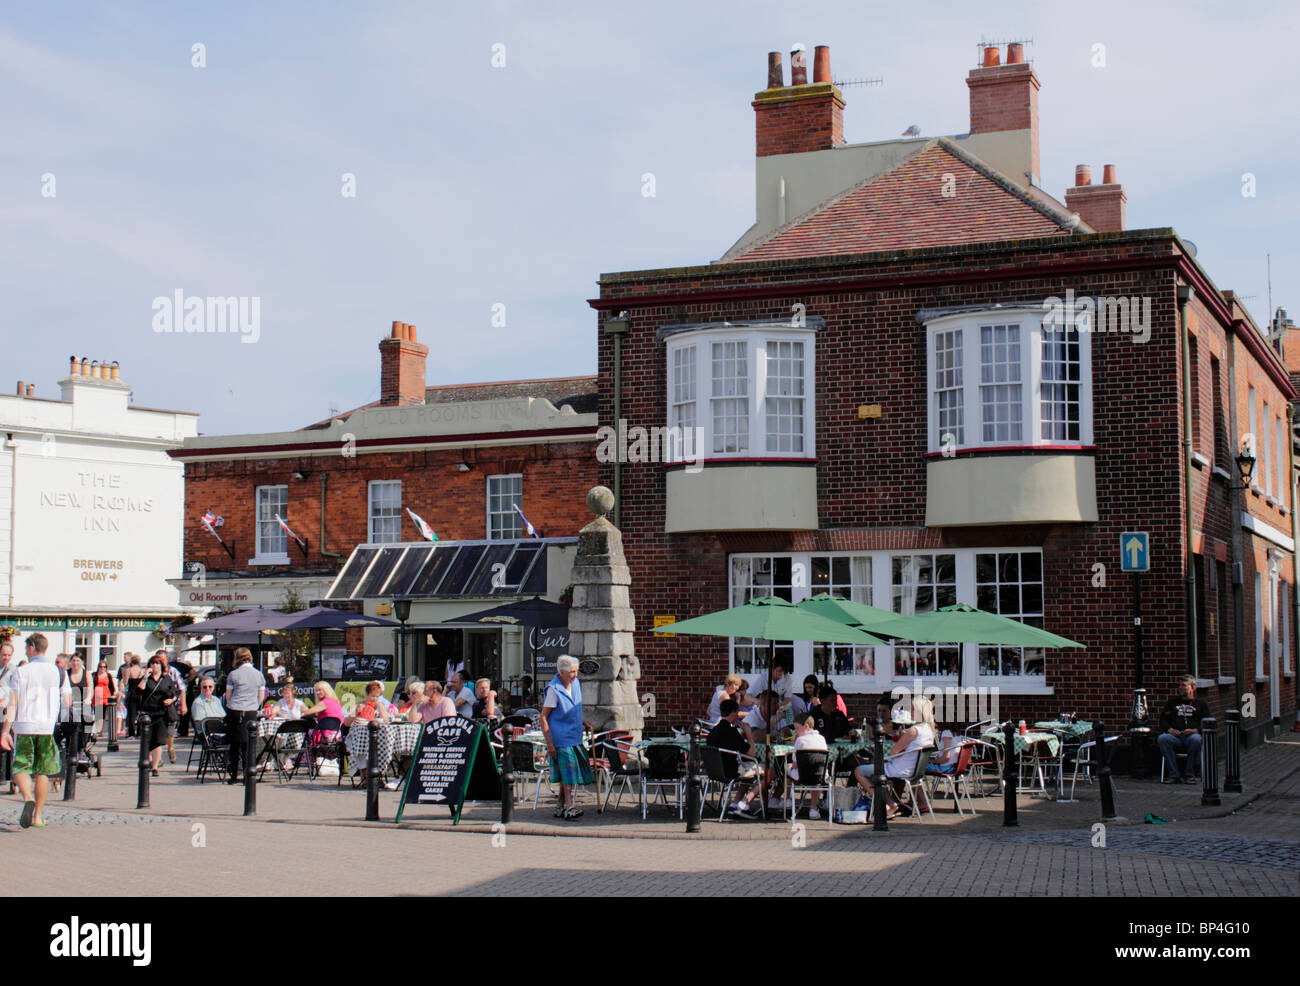 Seagul Cafe in Weymouth Harbour Dorset Sommer 2010 Stockfoto